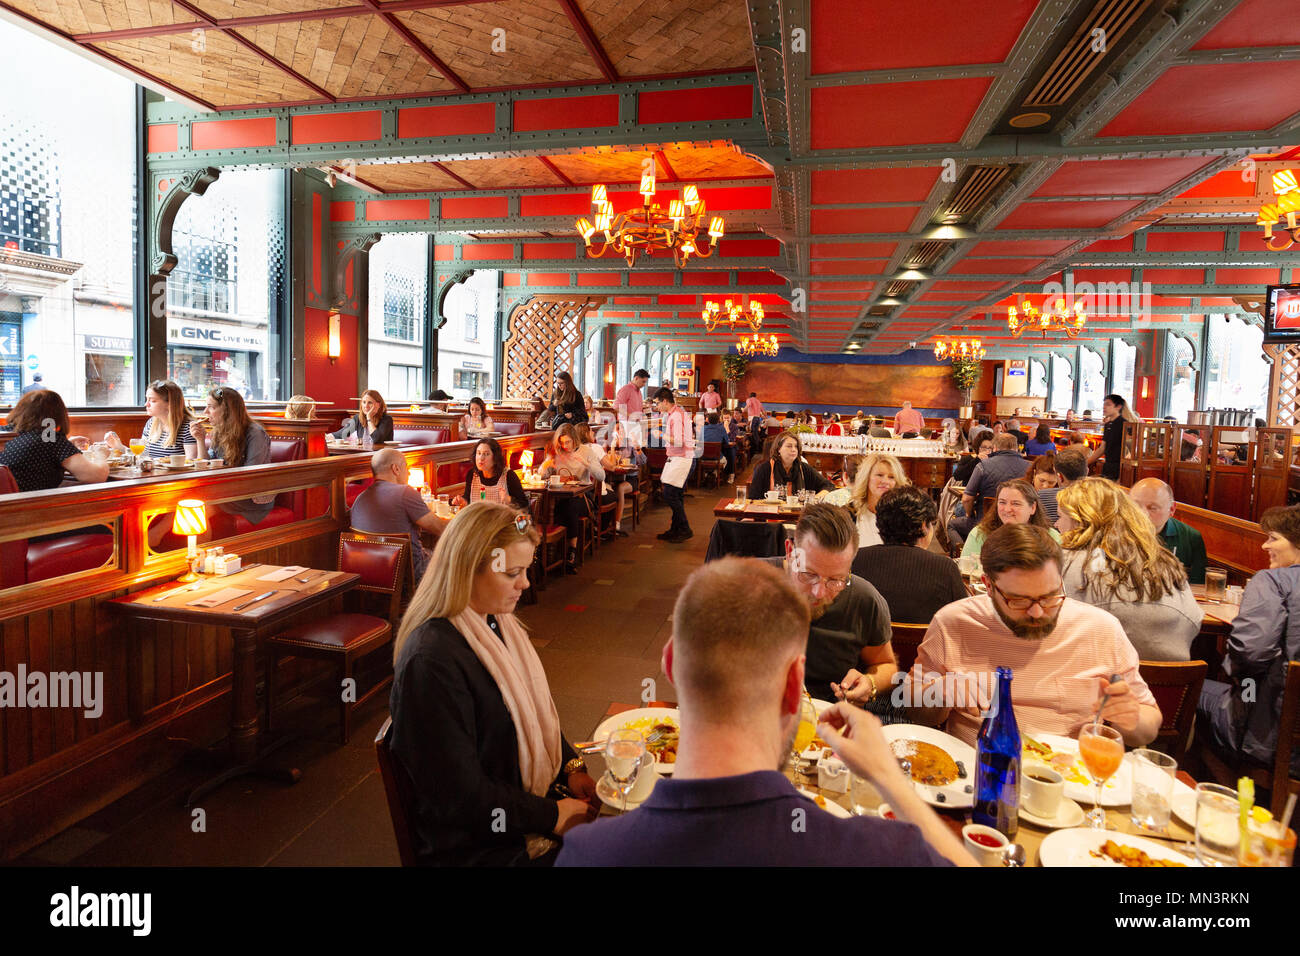 New York Diner - People eating breakfast in Pershing Square restaurant, midtown, New York city, USA Stock Photo